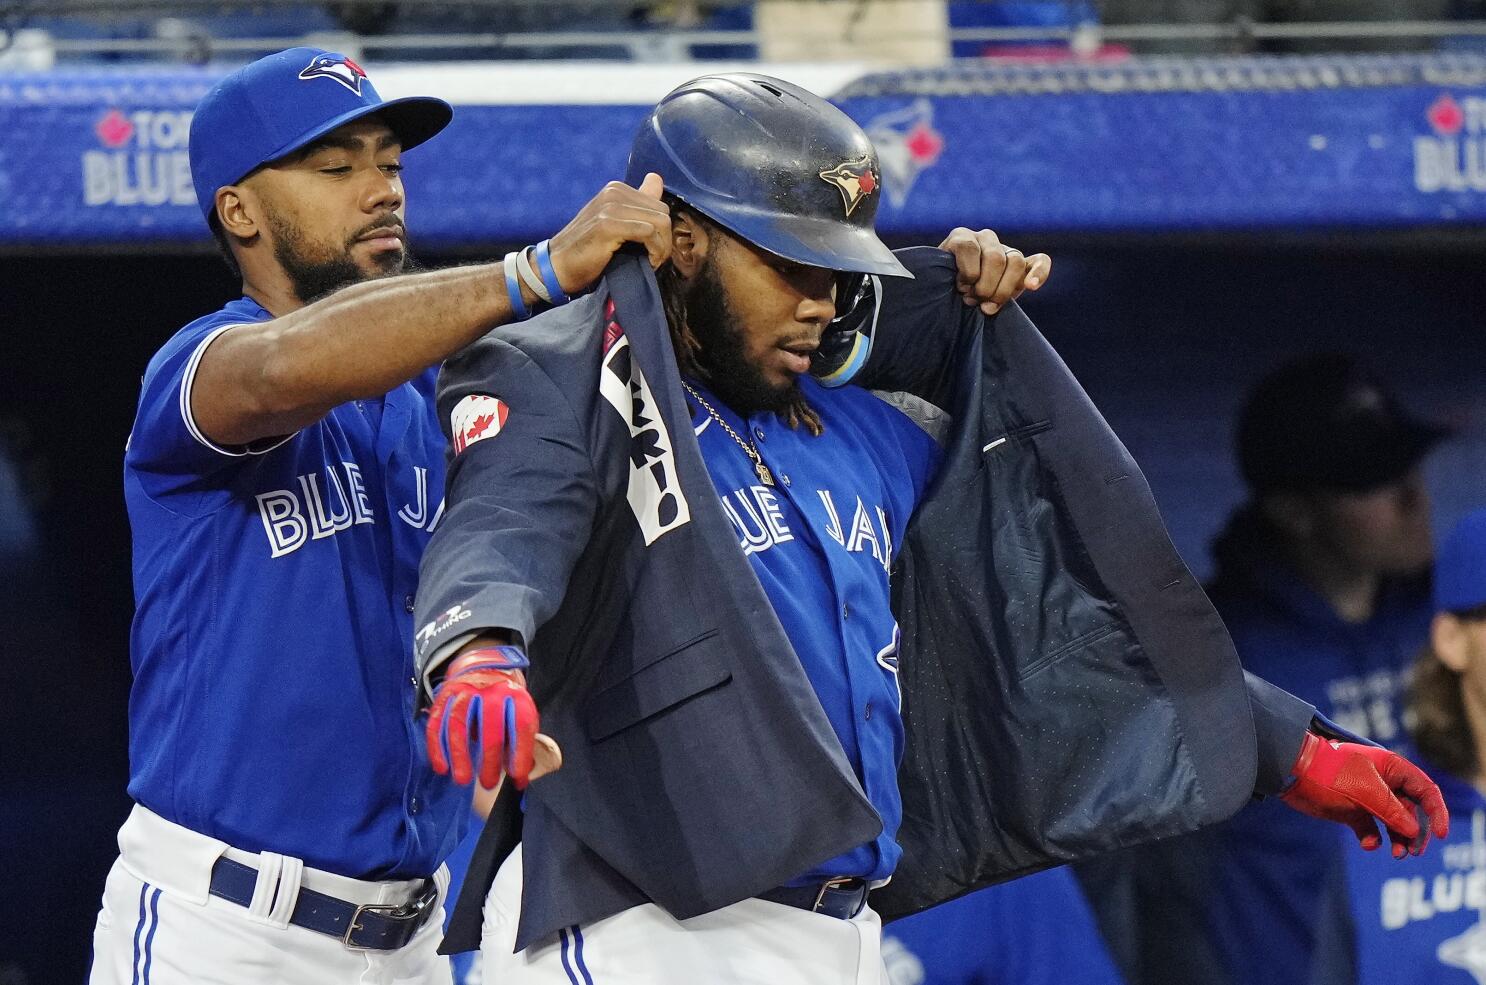 Jays hope to get more from Guerrero, compete in short season - The